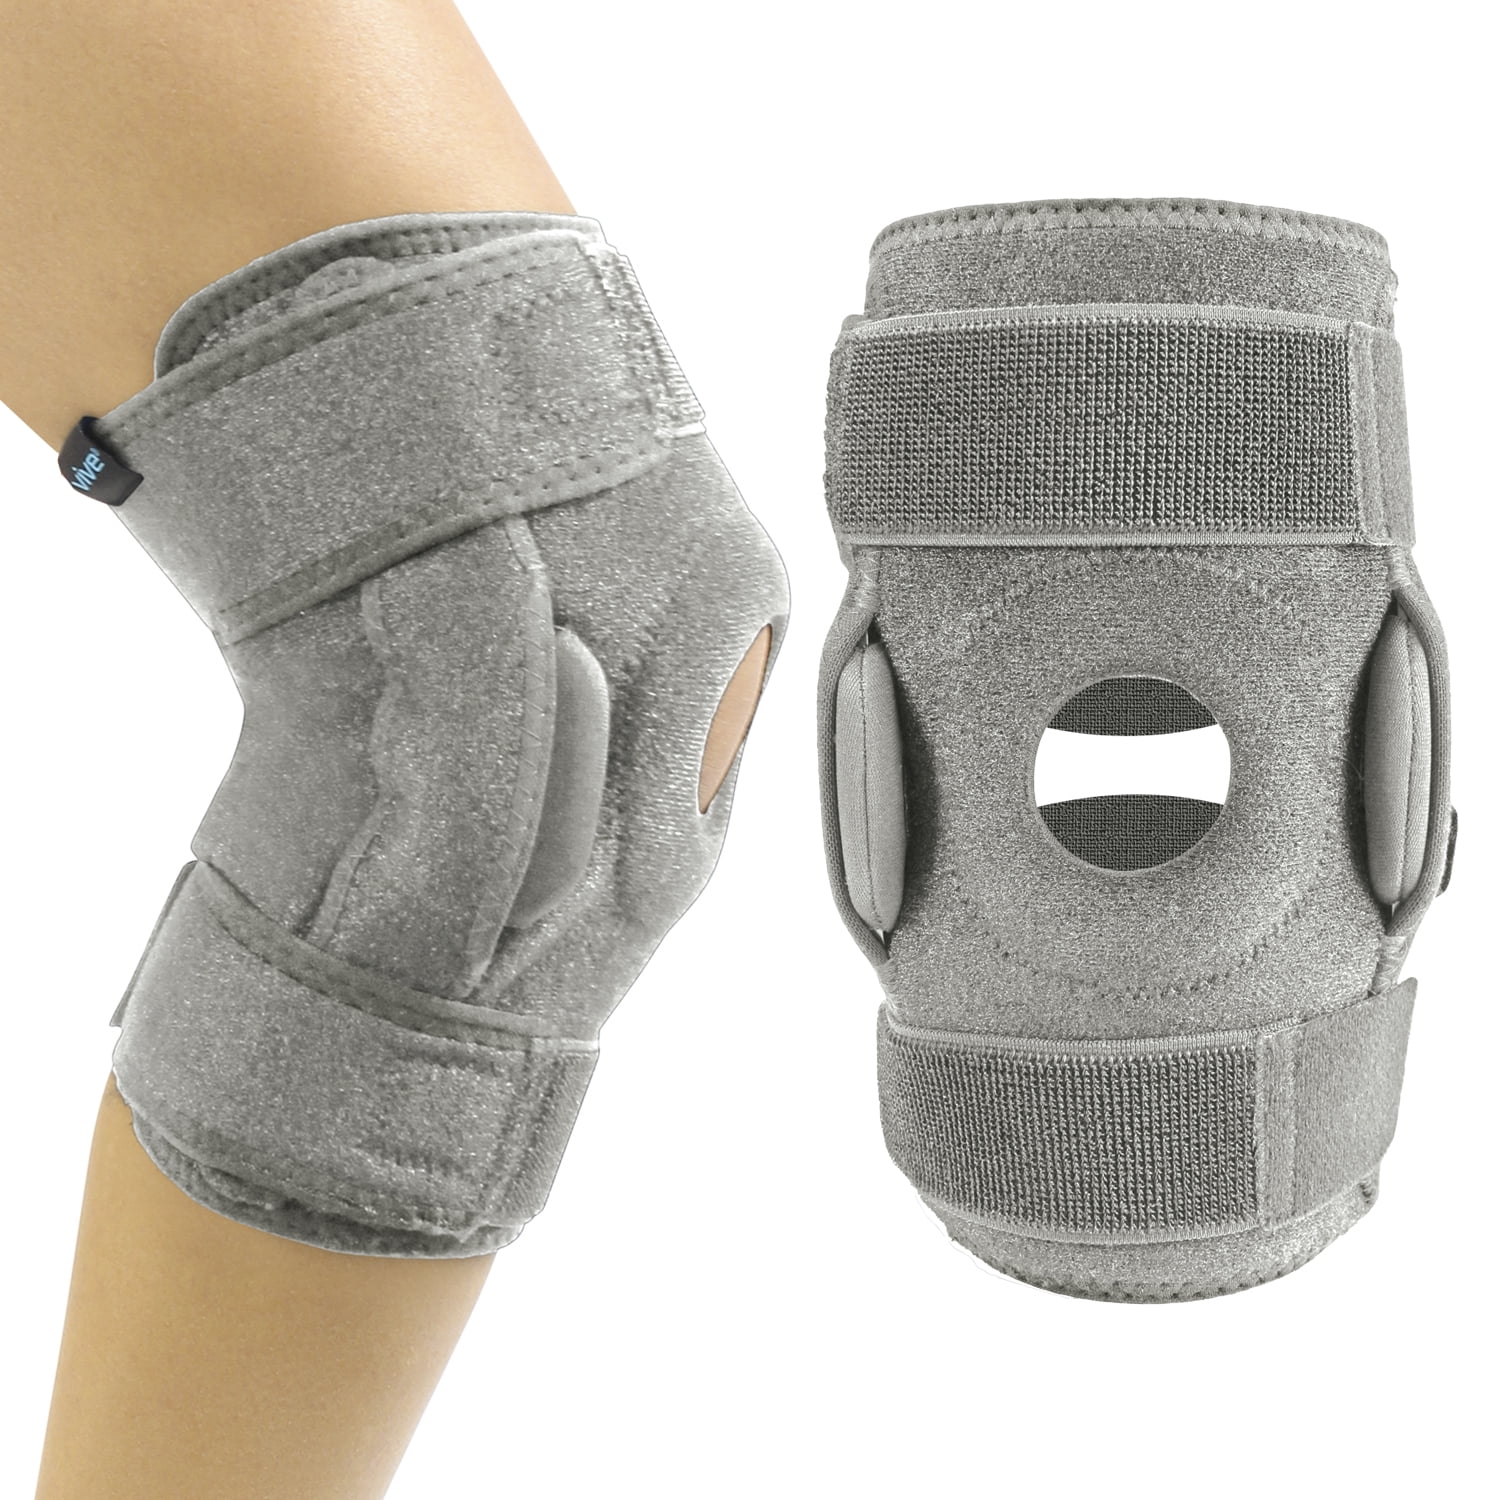 Kossto Open Patella Knee Brace with Adjustable Bi-Directional Straps -  Relieves Arthritis, Torn Meniscus, ACL/MCL, Running Sports, Joint Pain  Relief